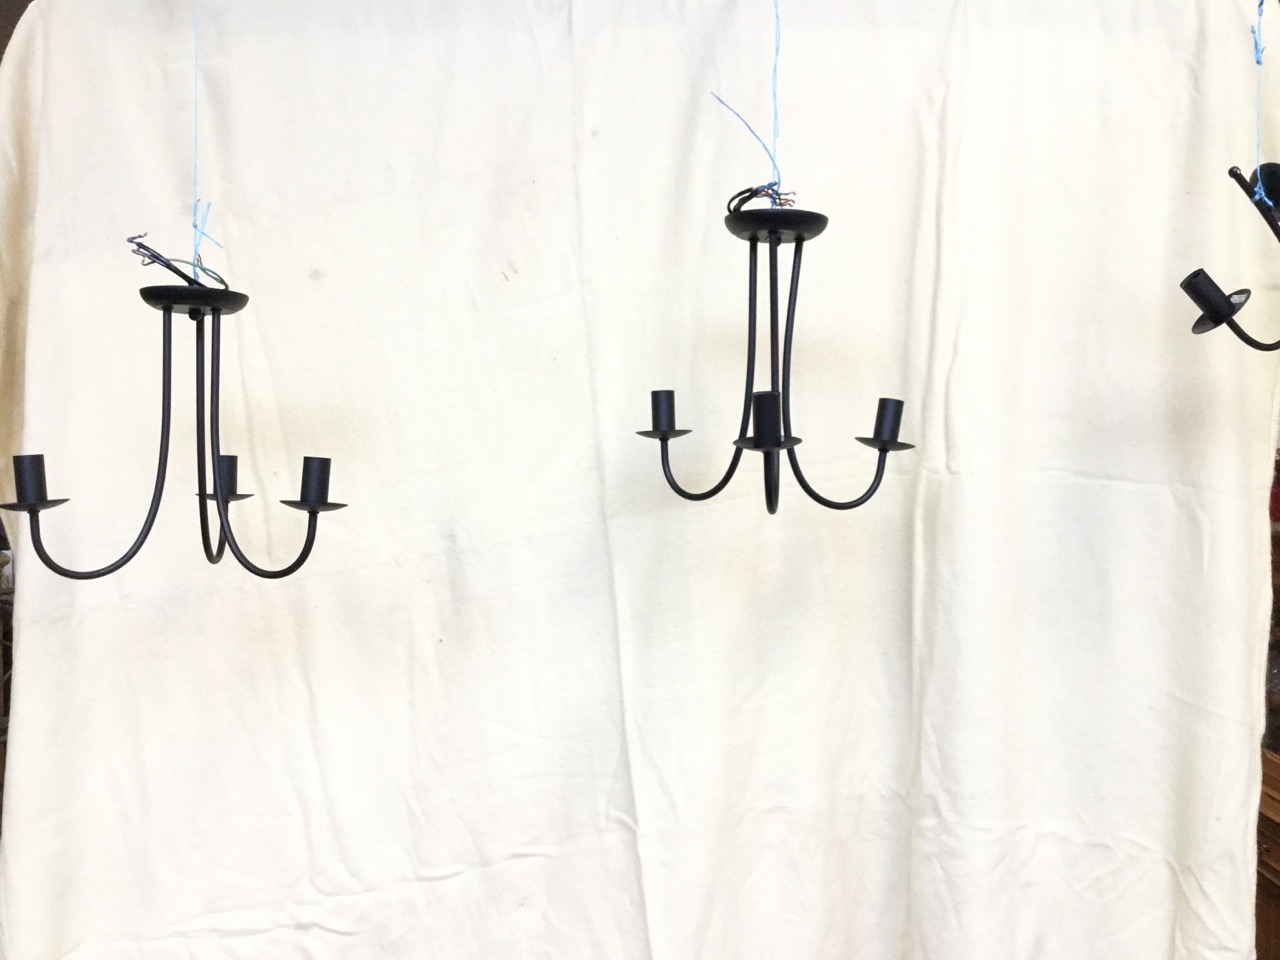 A pair of wrought iron hanging lights, each with three branches supporting candlelights beneath - Image 2 of 3